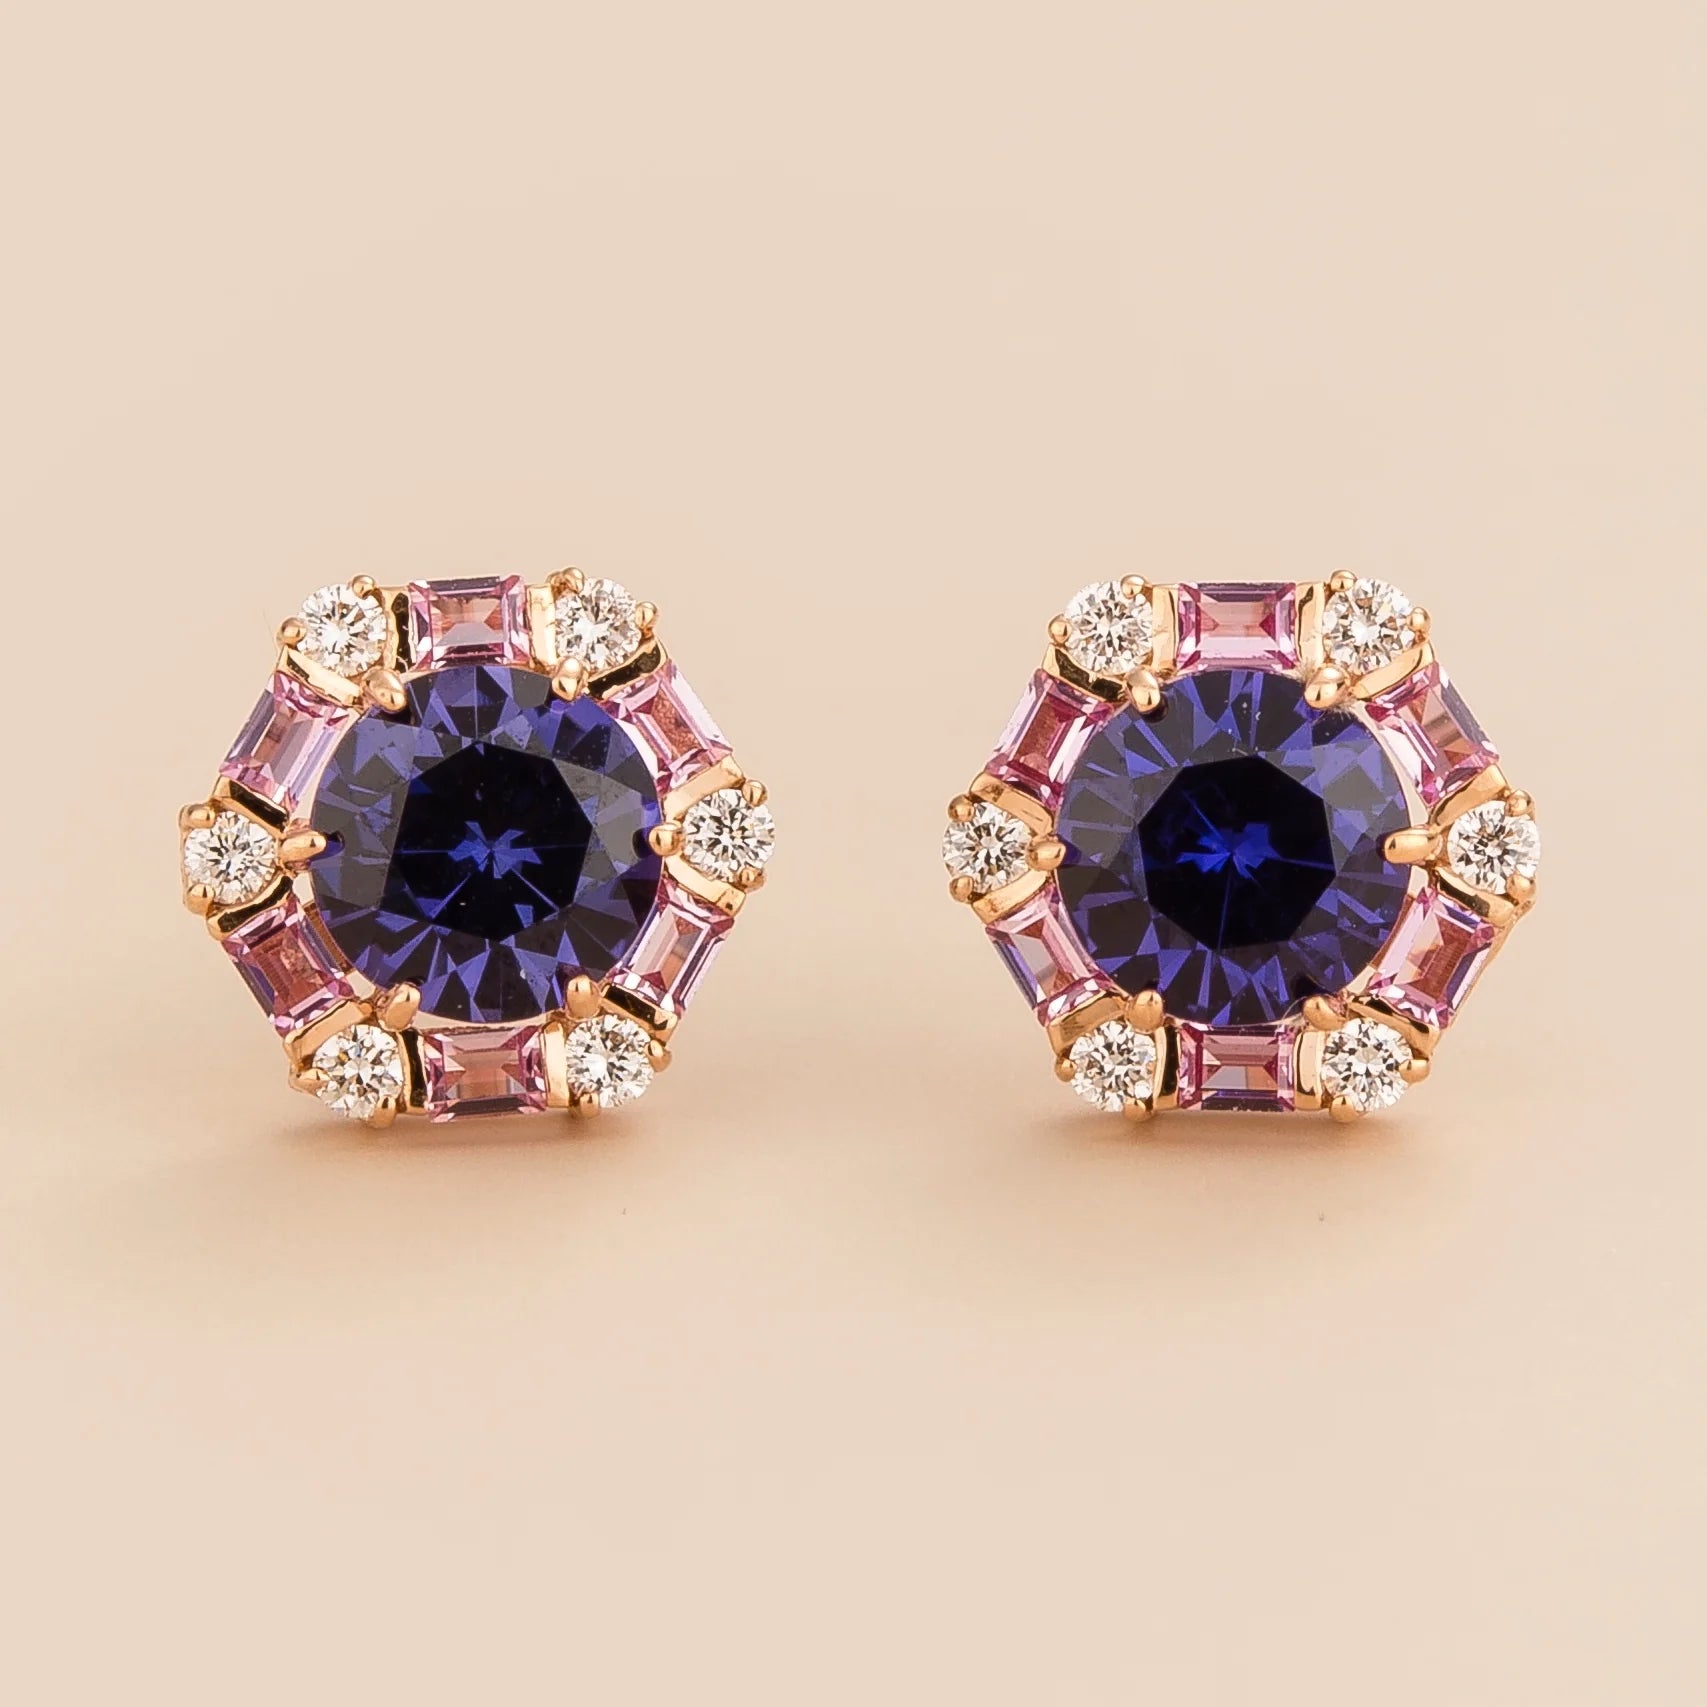 Melba earrings in 18K pink gold vermeil set with lab grown pink sapphire, purple sapphire and diamond gem stones. Perfect for yourself and as gift.